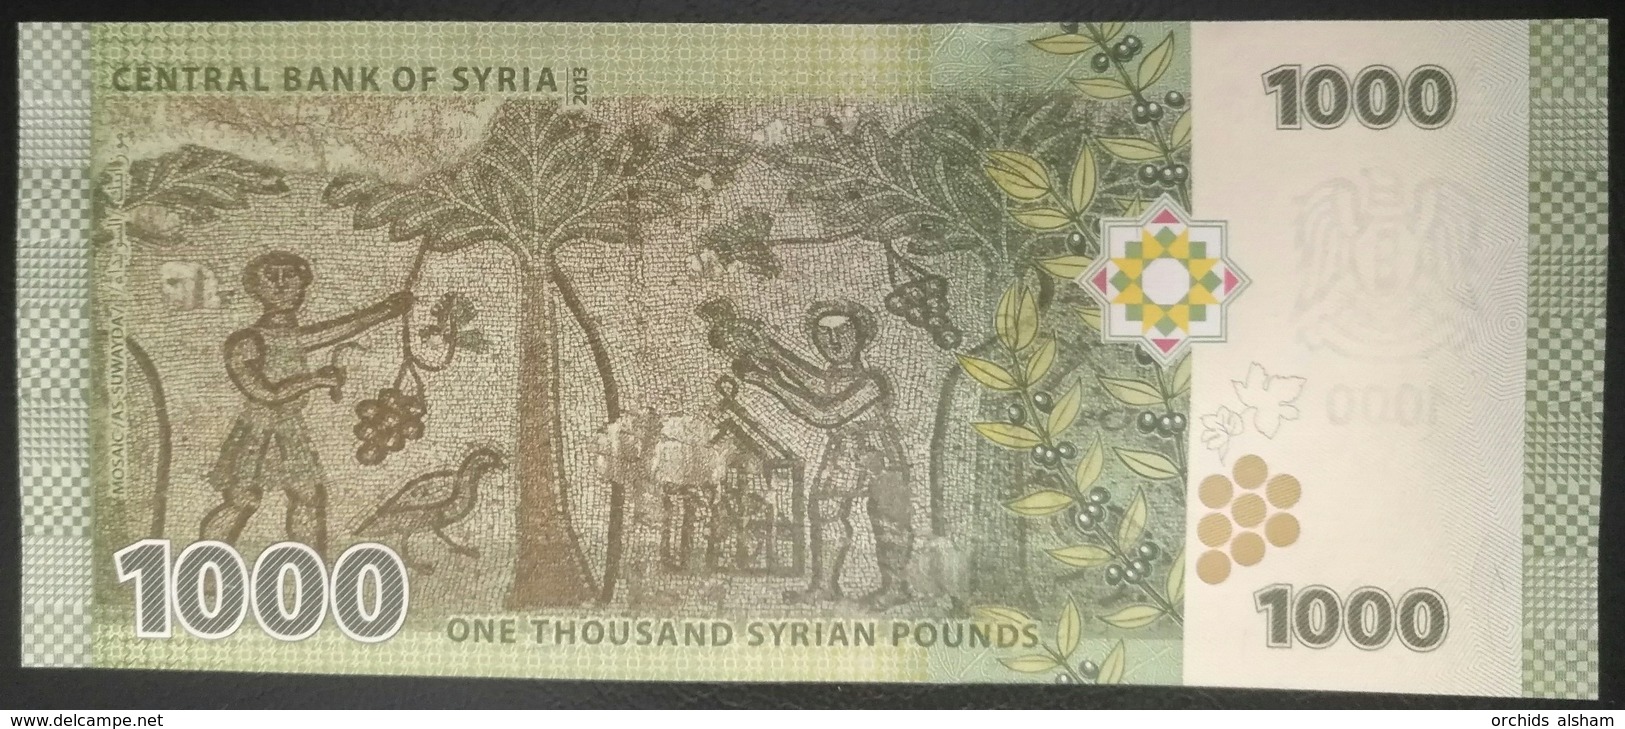 Syria 2013 1000 Pounds, Liras . P-116, UNC - Old Musical Instruments - Syria